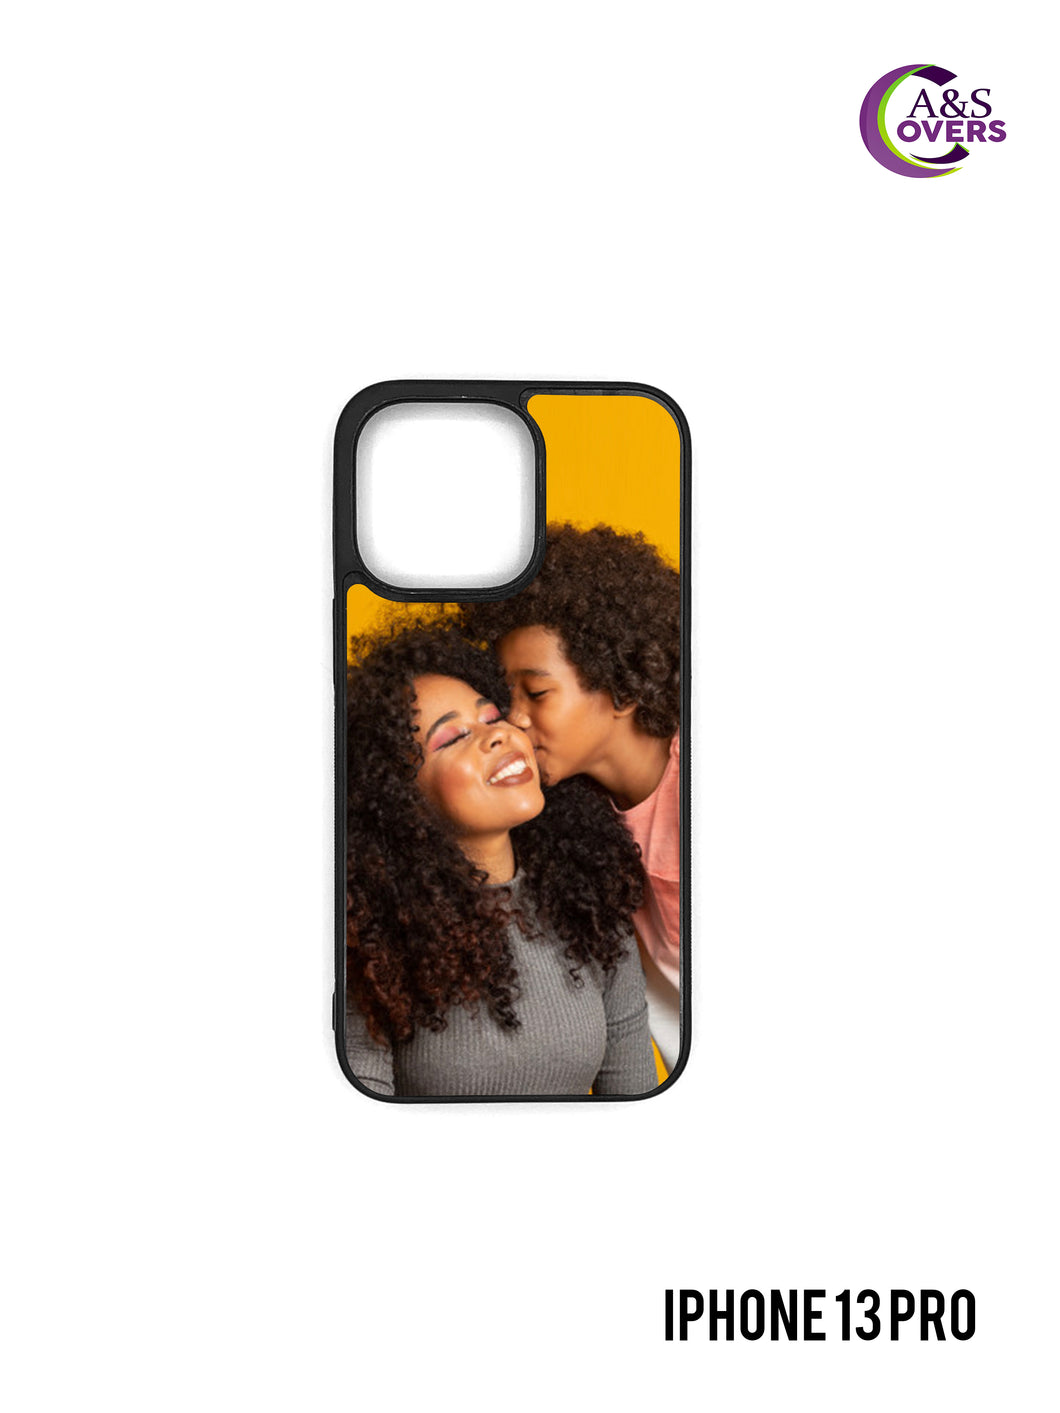 iPhone 13 Pro Grip Case - A&S Covers